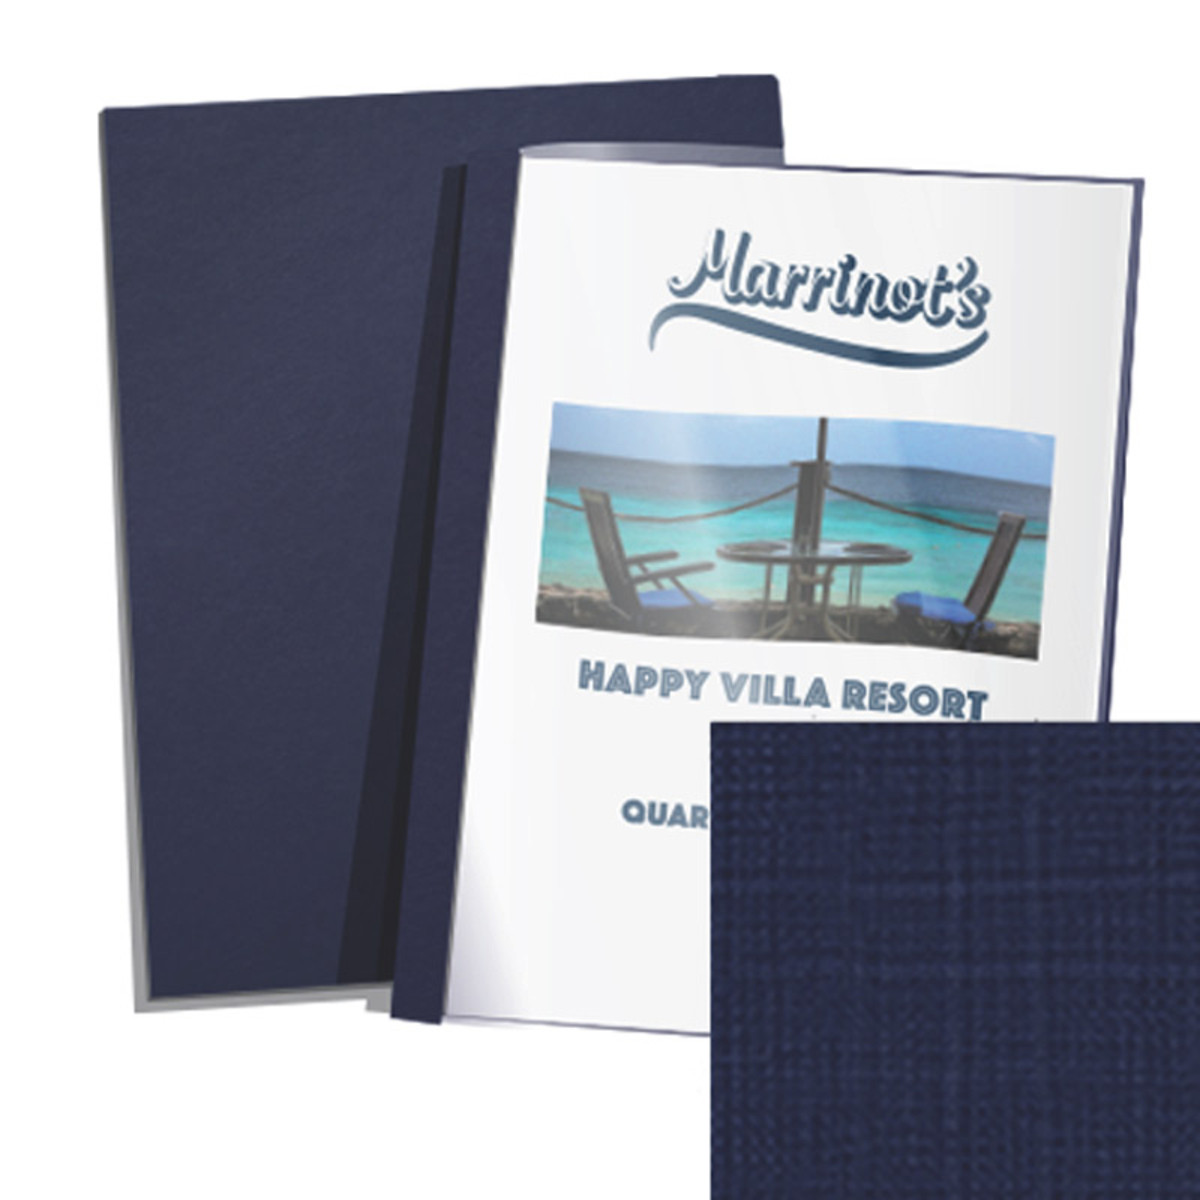 Thermal binding covers and supplies